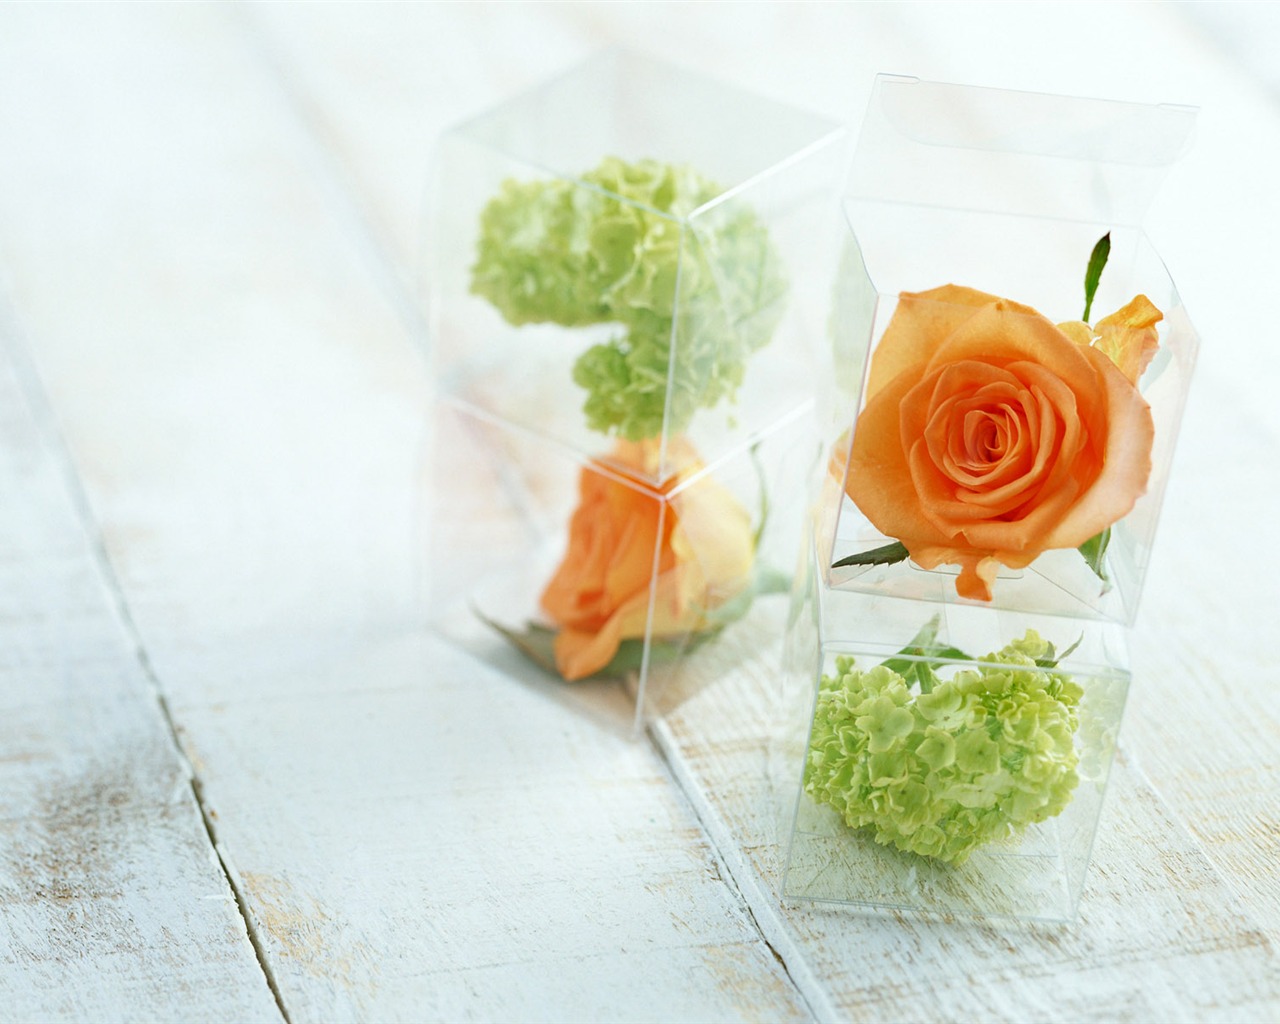 Flowers and gifts wallpaper (2) #6 - 1280x1024